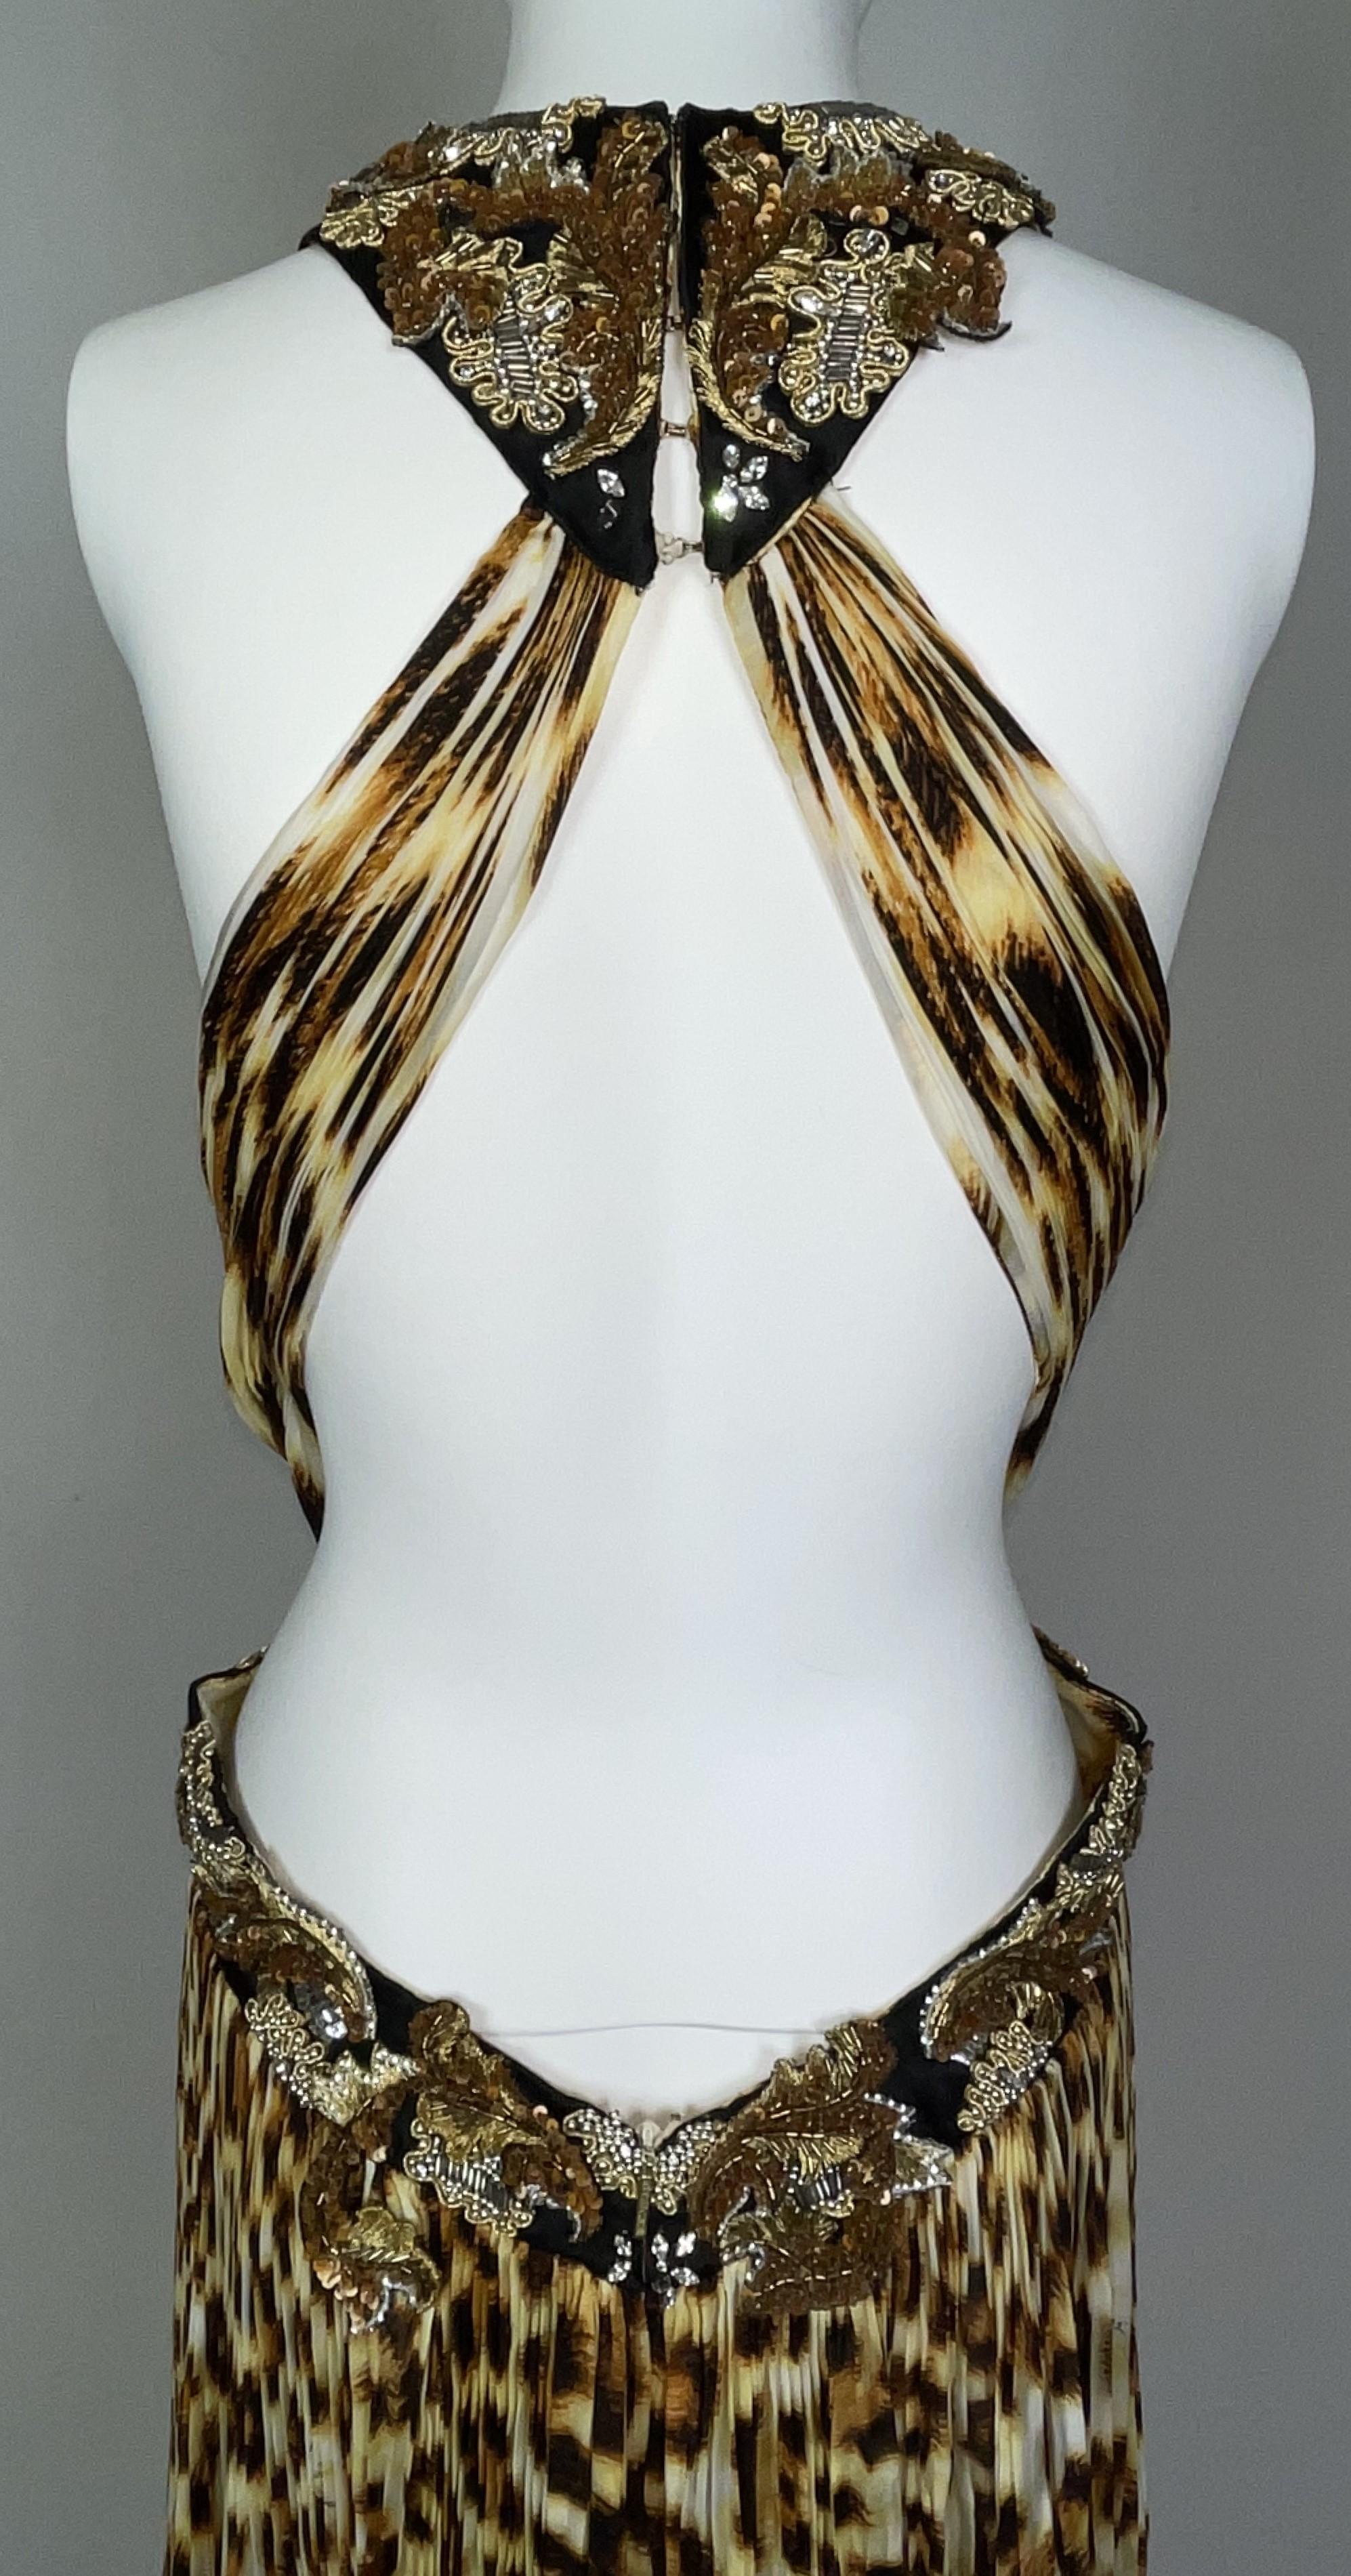 S/S 2007 Roberto Cavalli Runway Backless Embellished Silk Leopard Gown Dress 1